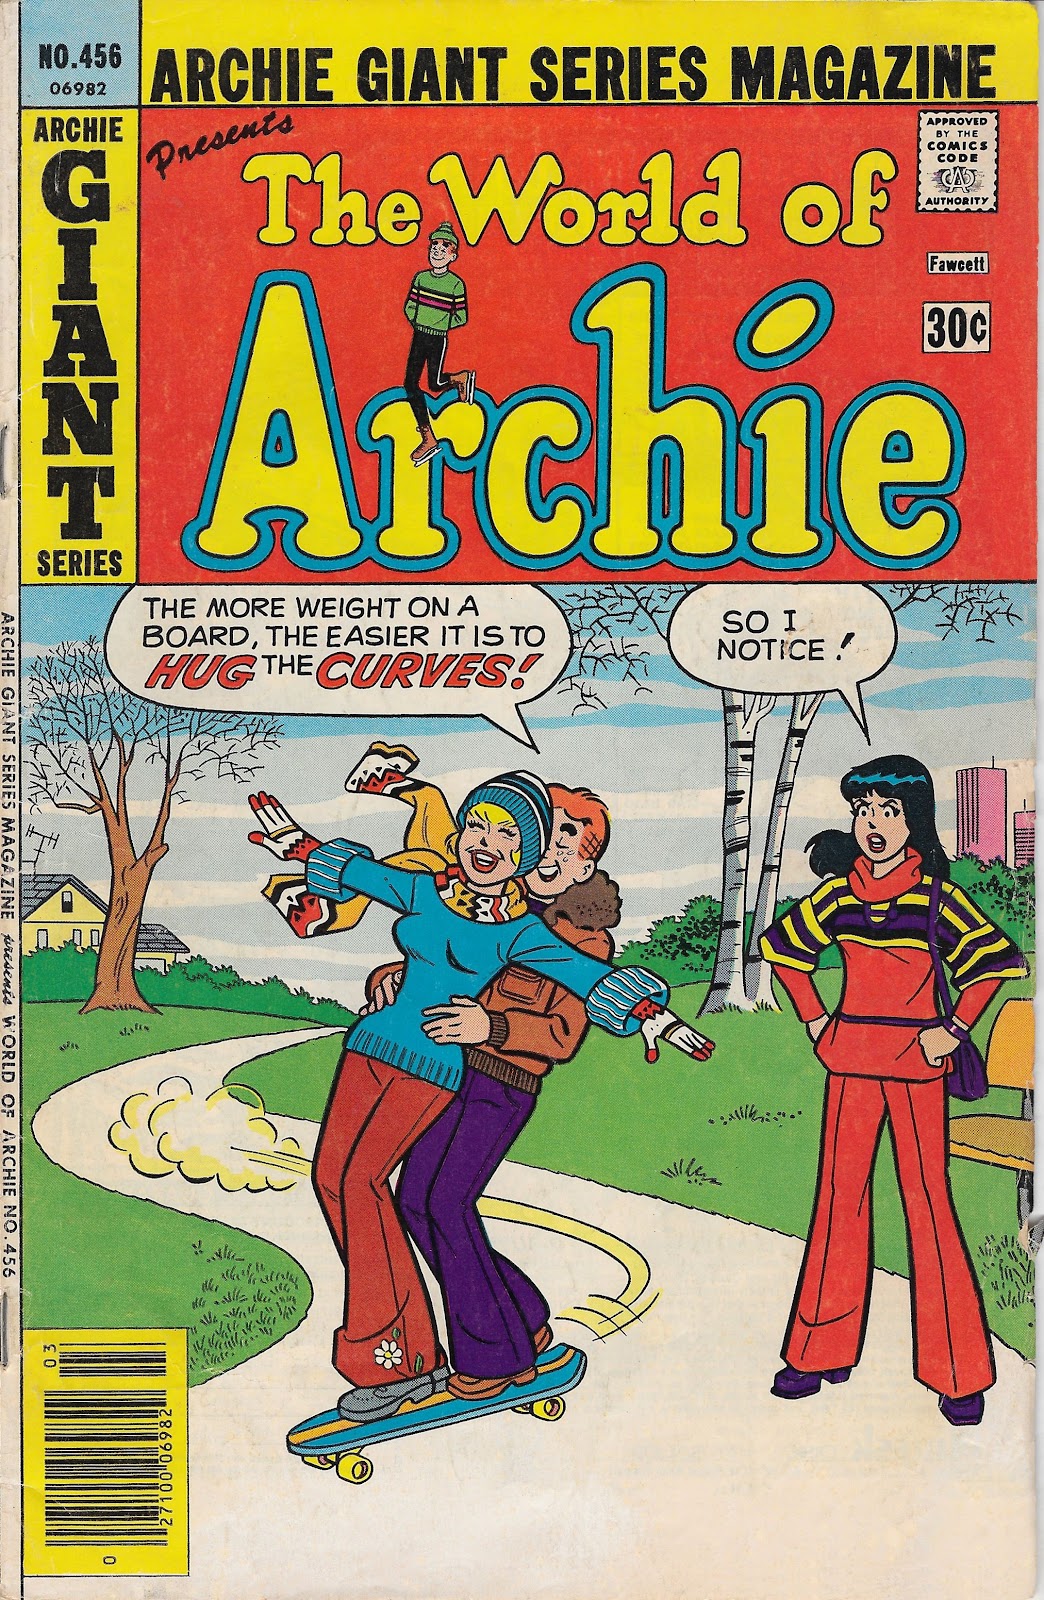 Archie Giant Series Magazine 456 Page 1